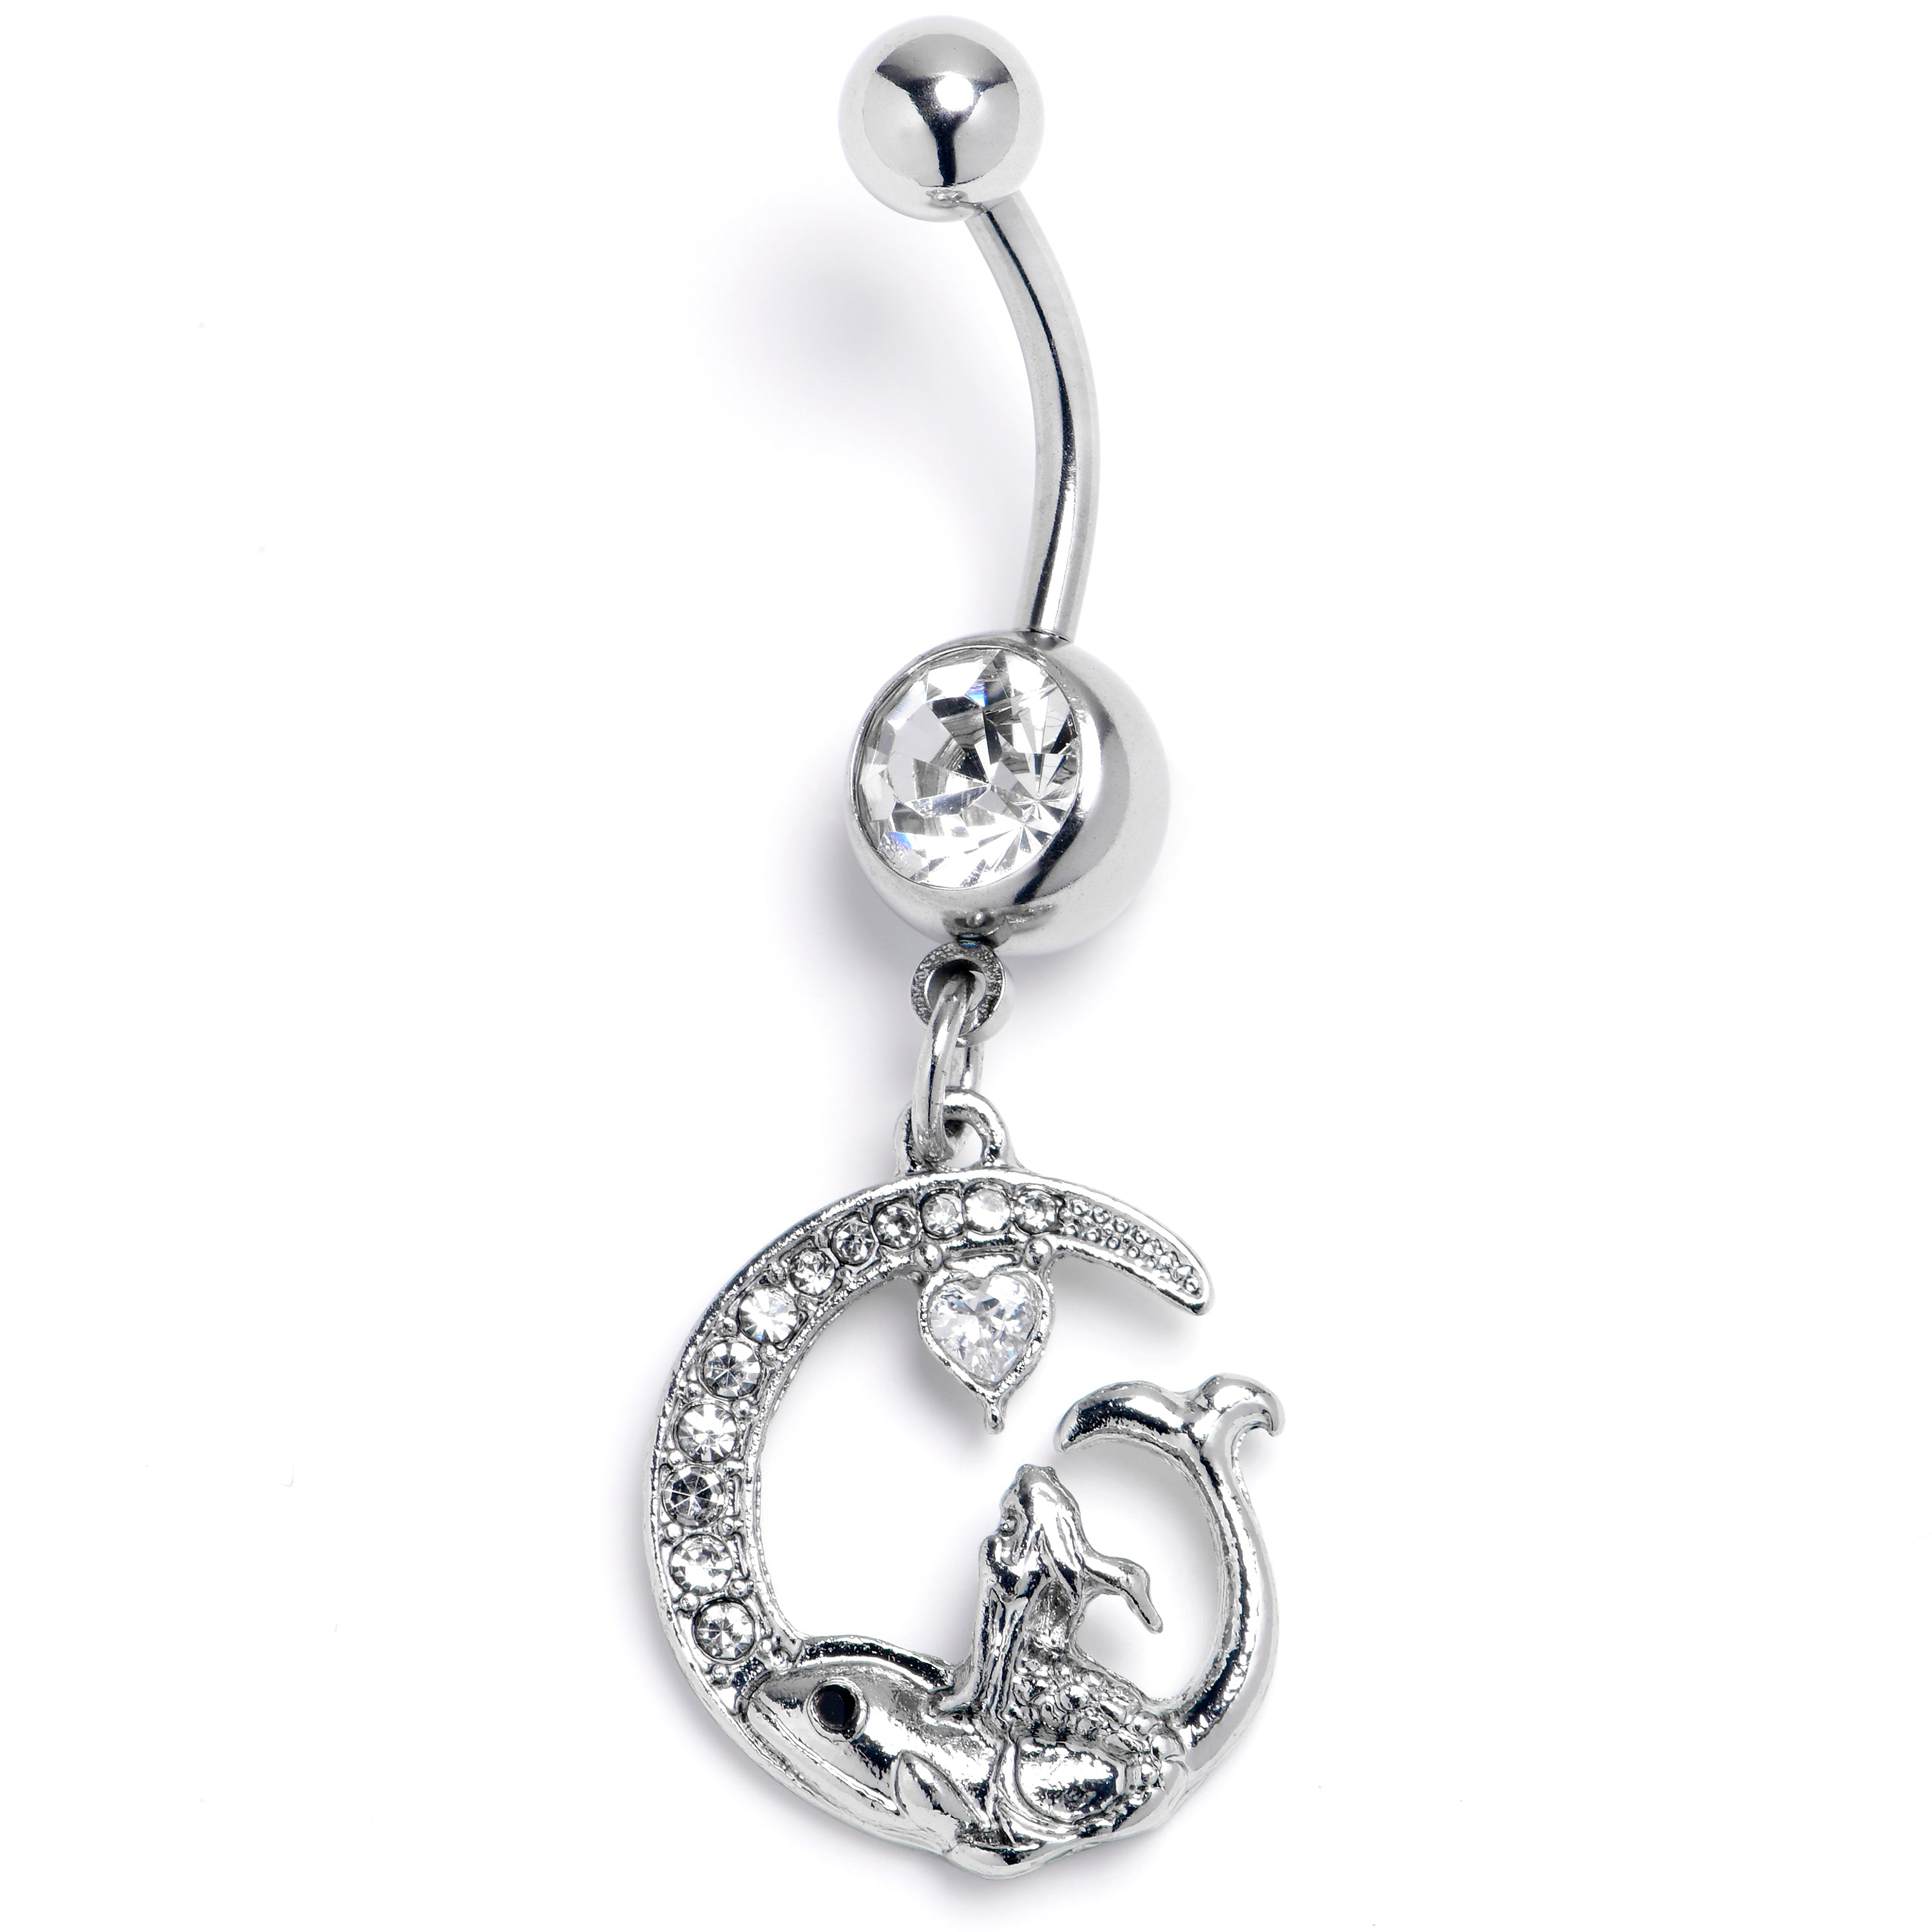 Clear Gem Riding Mermaid Dangle Belly Ring